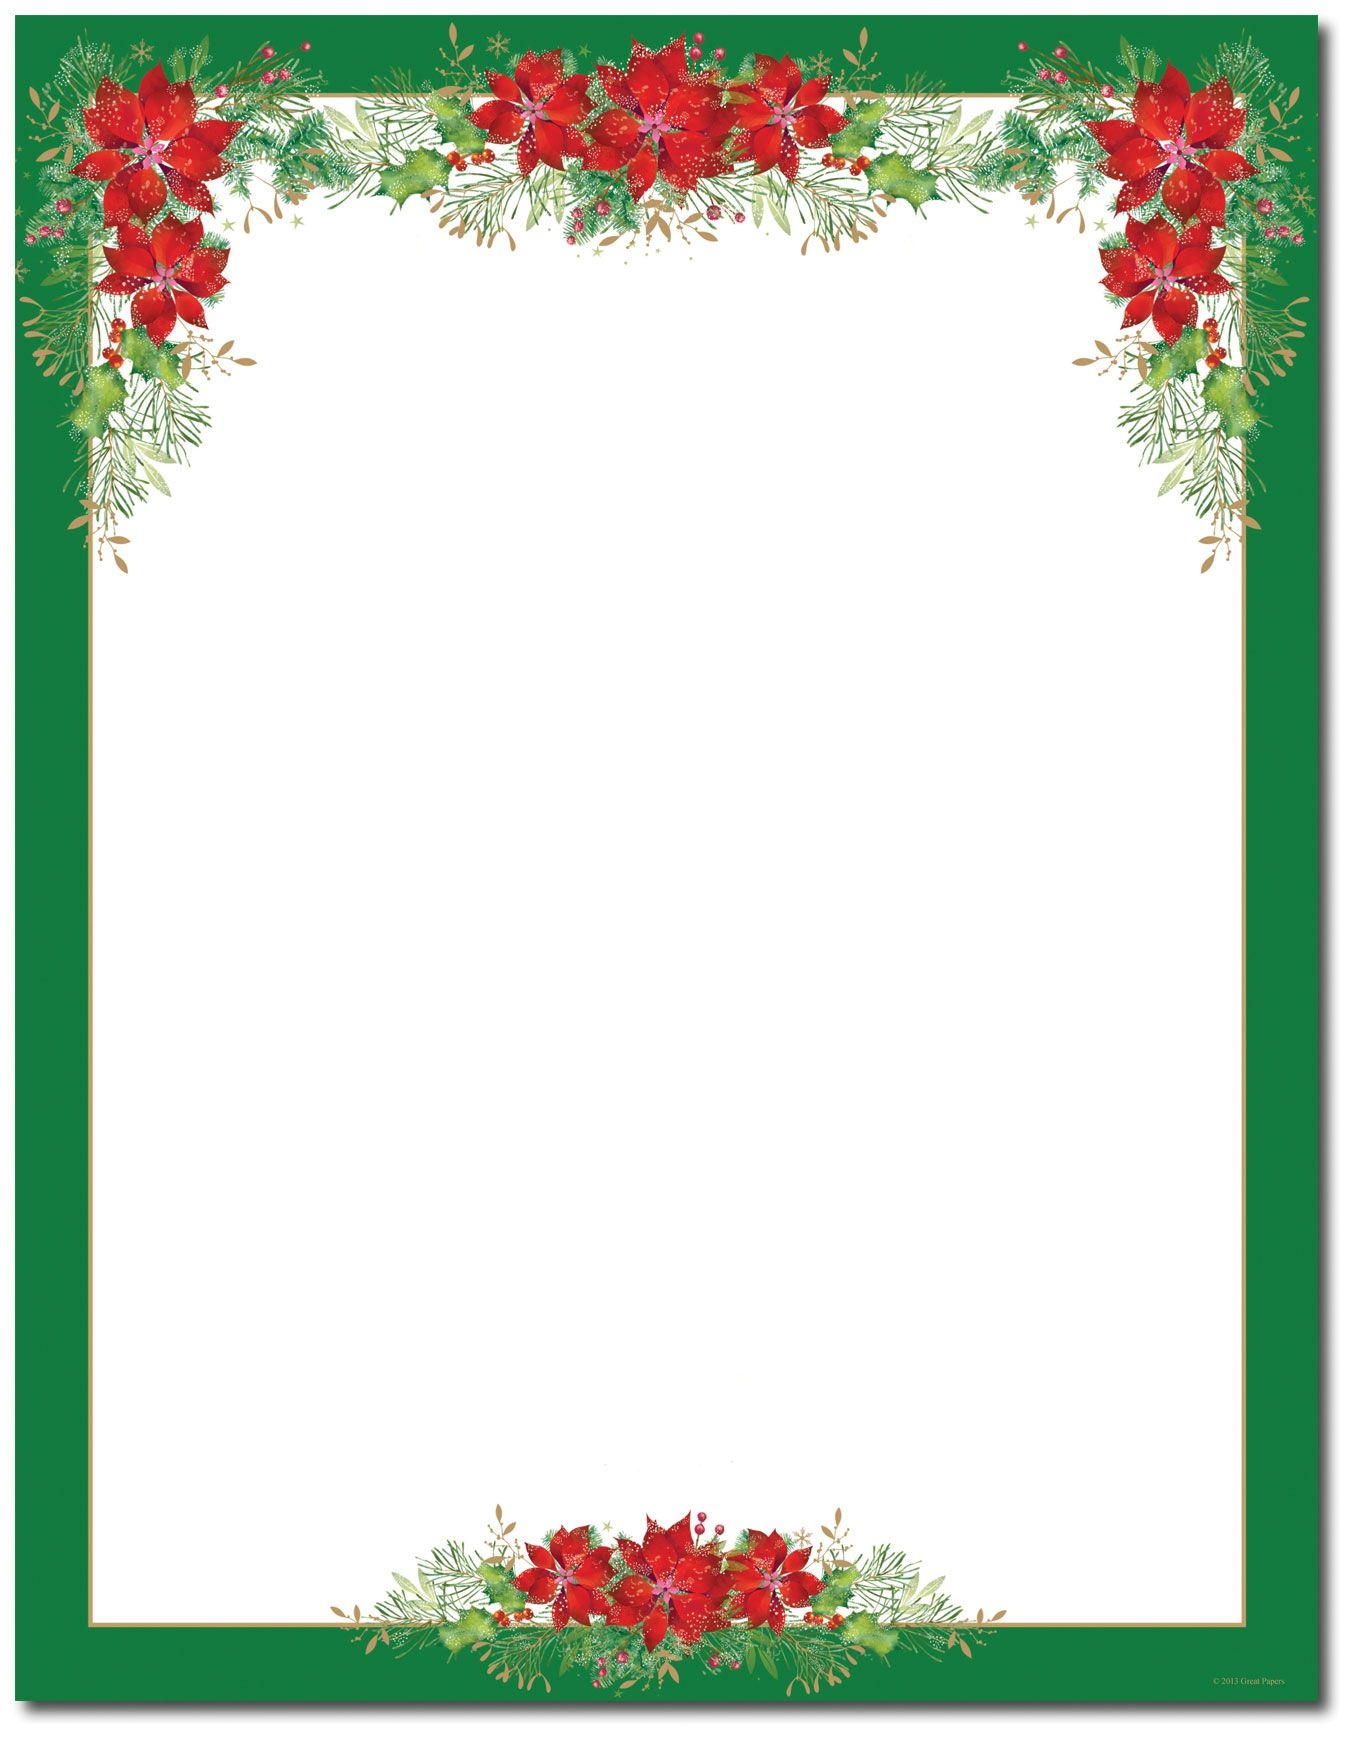 Poinsettia Valance Letterhead | Holiday Papers | Christmas Border - Free Printable Christmas Paper With Borders